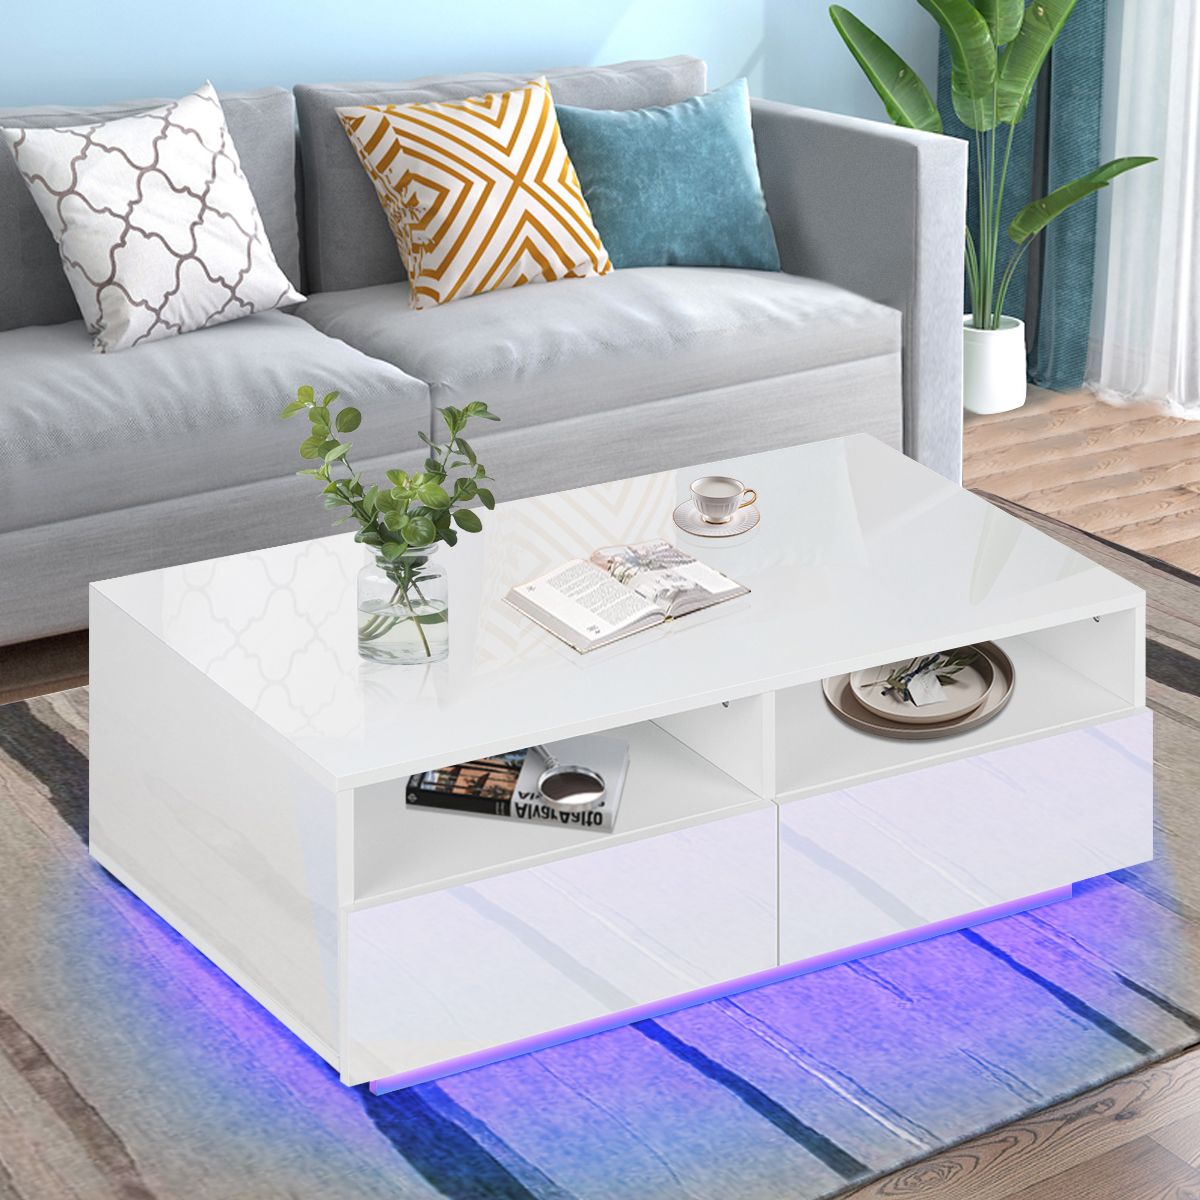 Hommpa High Gloss Led Coffee Table W/ 4 Drawers Living Room With Remote Inside Led Coffee Tables With 4 Drawers (View 4 of 20)